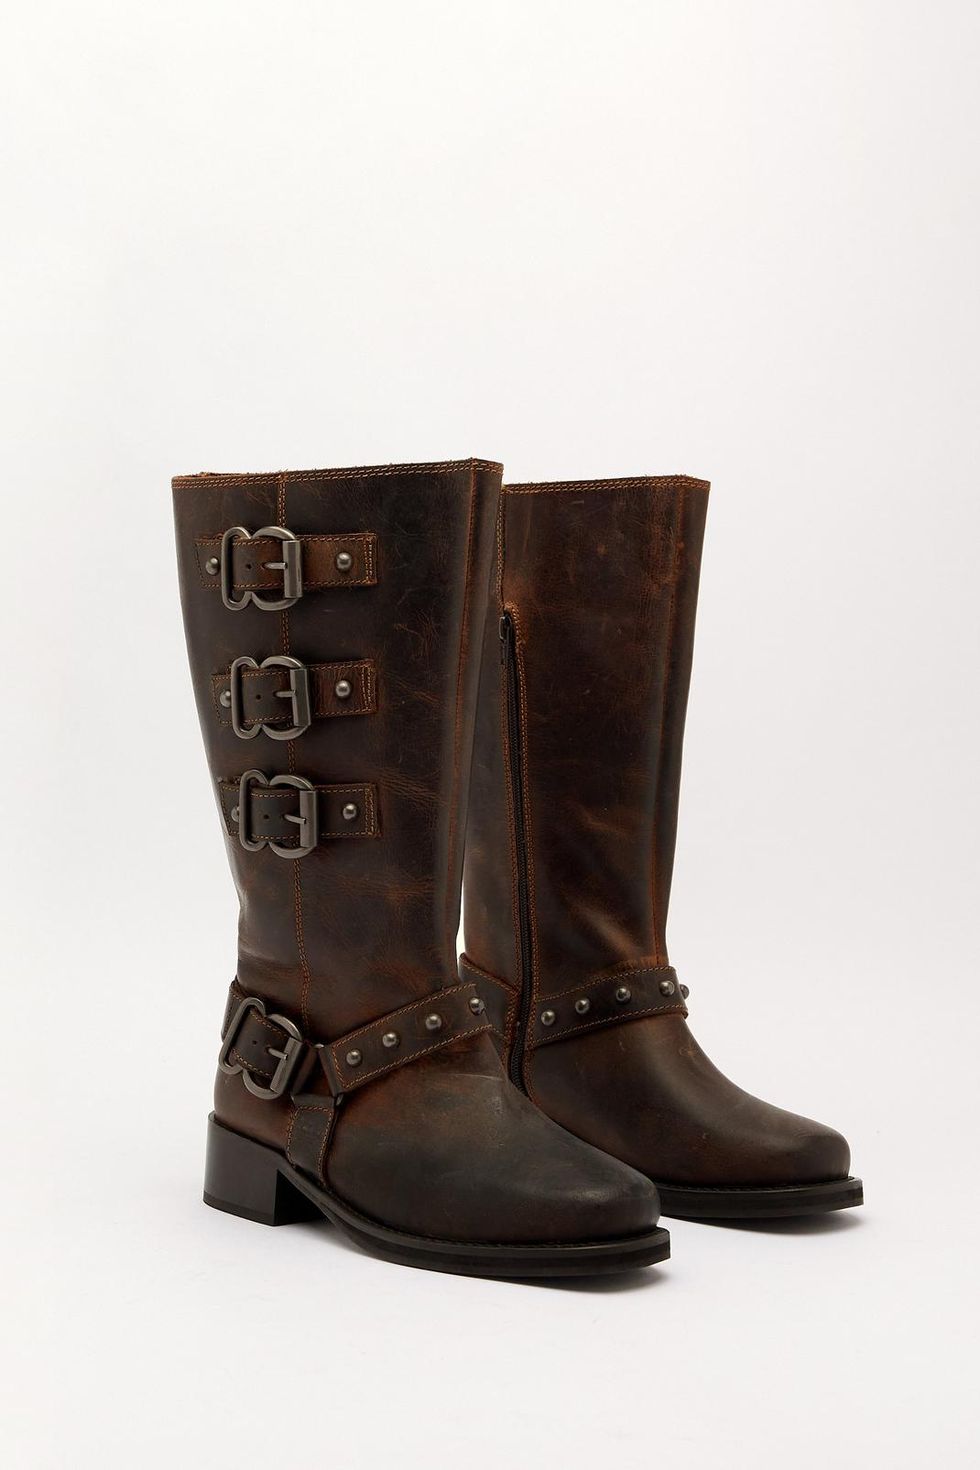 Tarnished Leather Multi Buckle Harness Knee High Boots